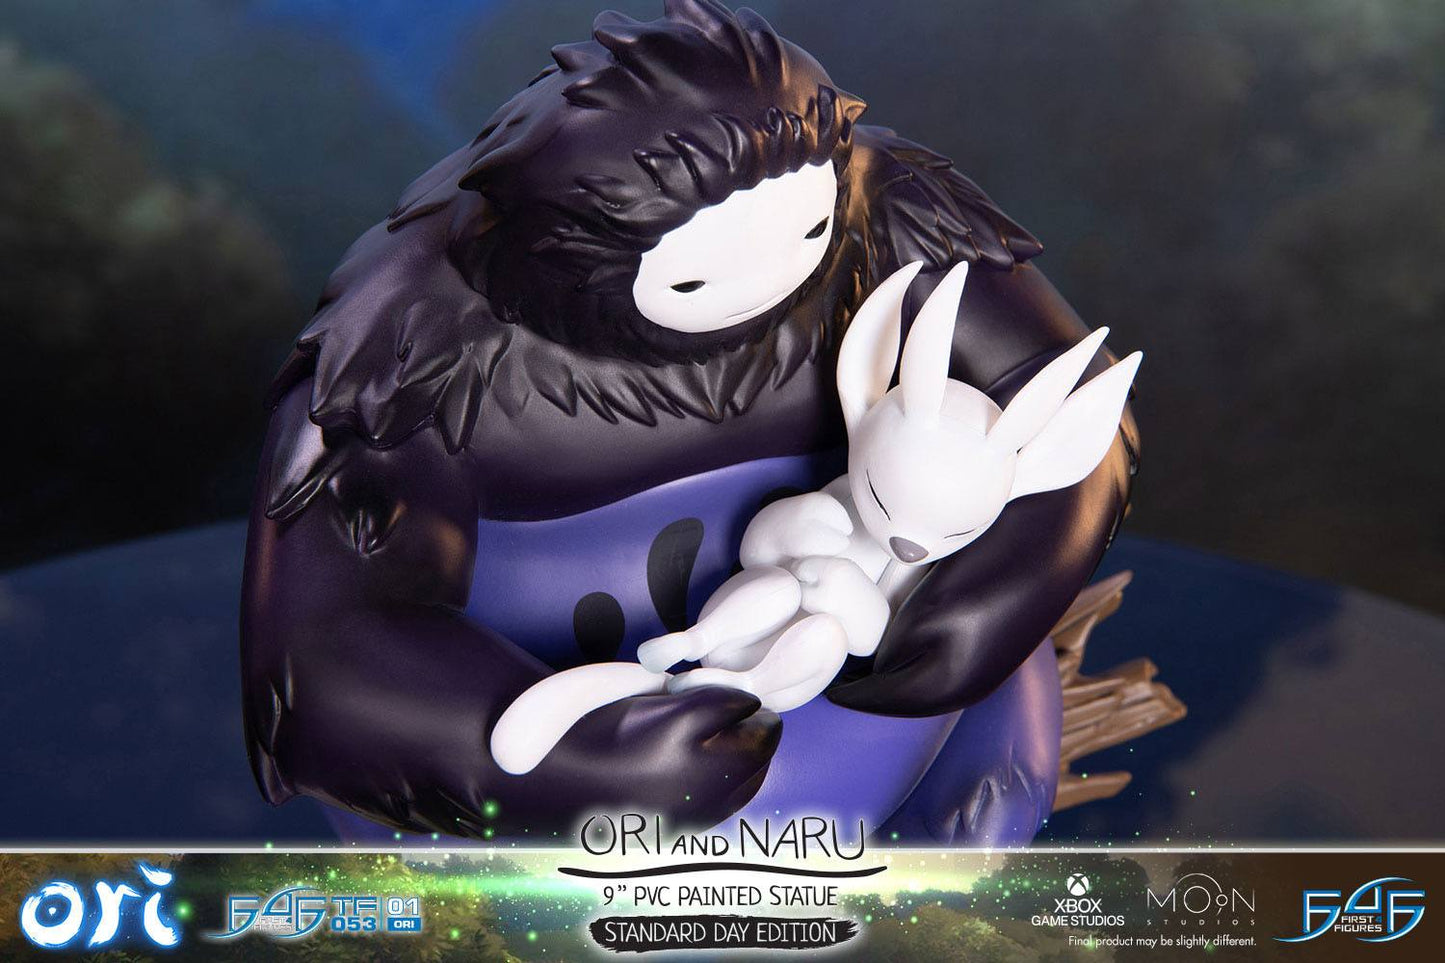 Ori & Naru - Day Edition & Ori and the Blind Forest